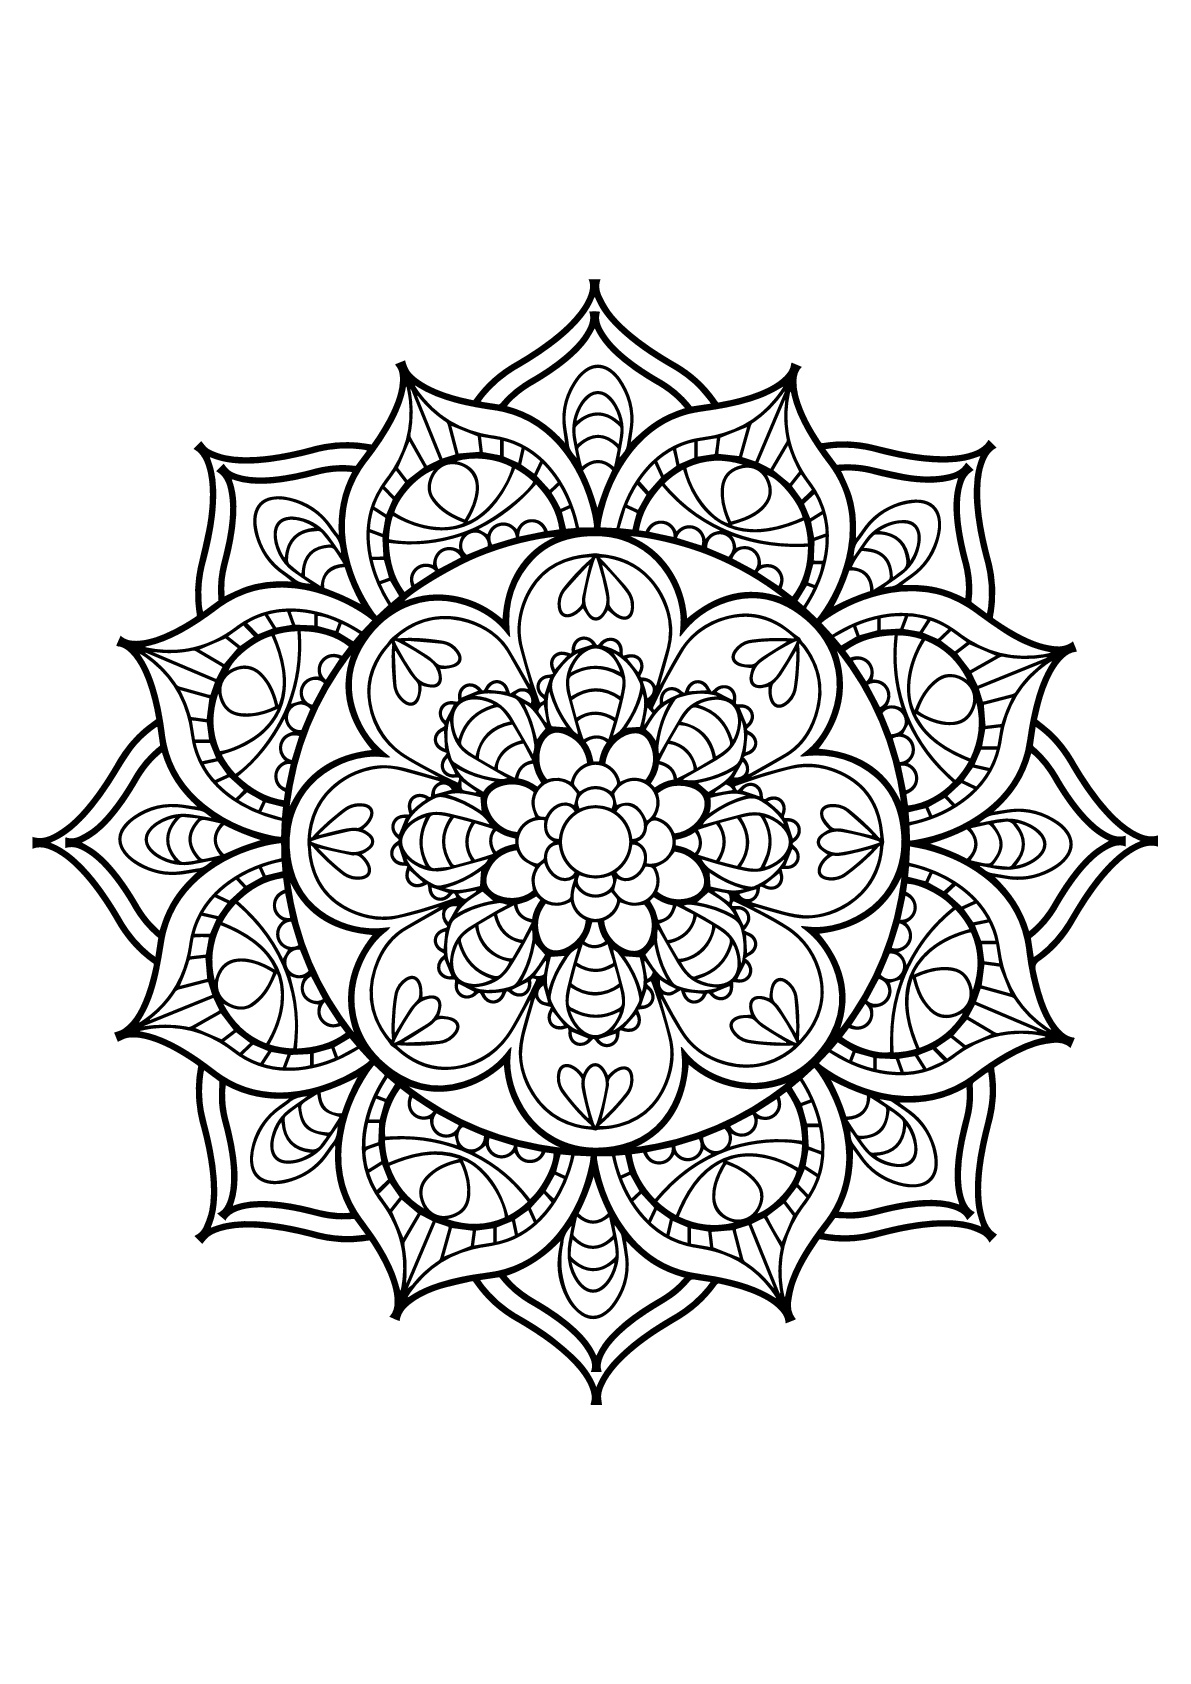 Mandala Coloring Book For Kids Ages 8 - 12: A Collection of a Fun And Big  25 Mandalas To Color For Relaxation ( Mandala Coloring Books For Kids )  (Paperback)